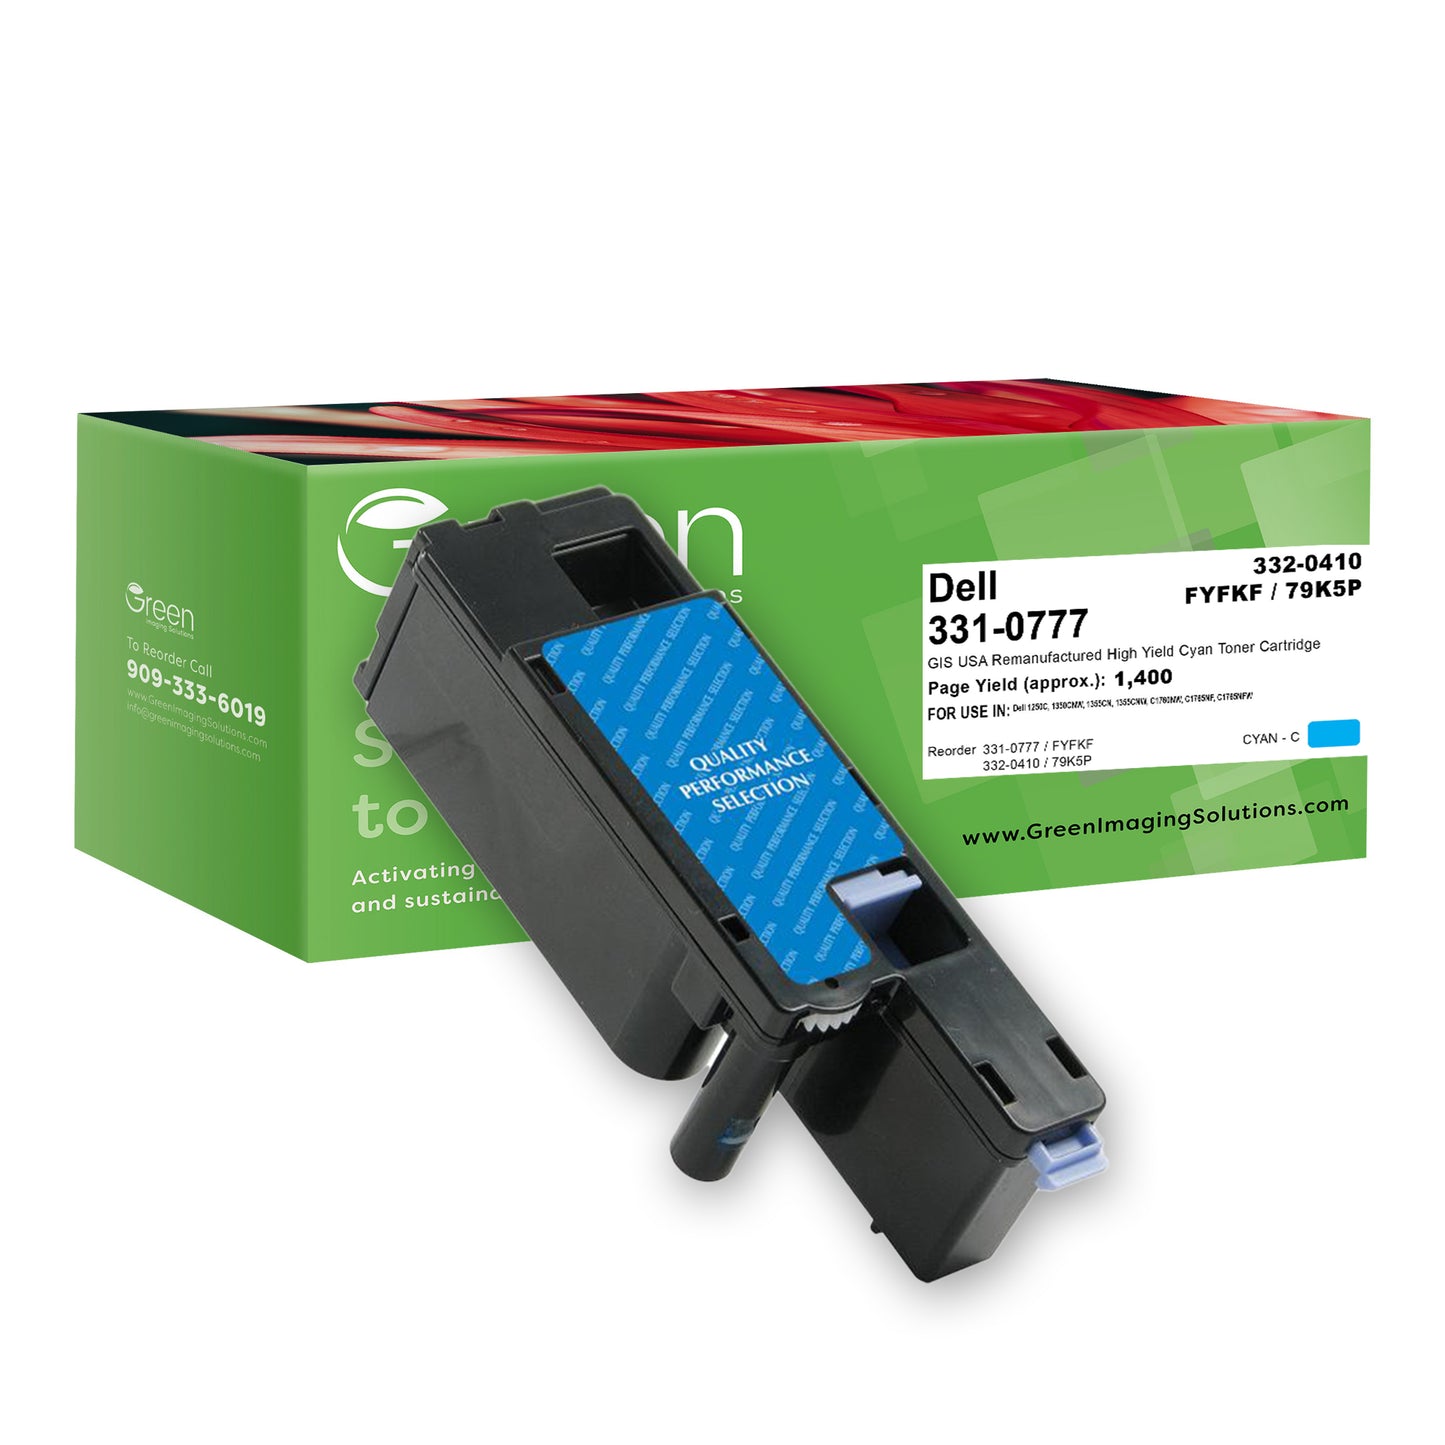 Green Imaging Solutions USA Remanufactured High Yield Cyan Toner Cartridge for Dell 1250/C1760